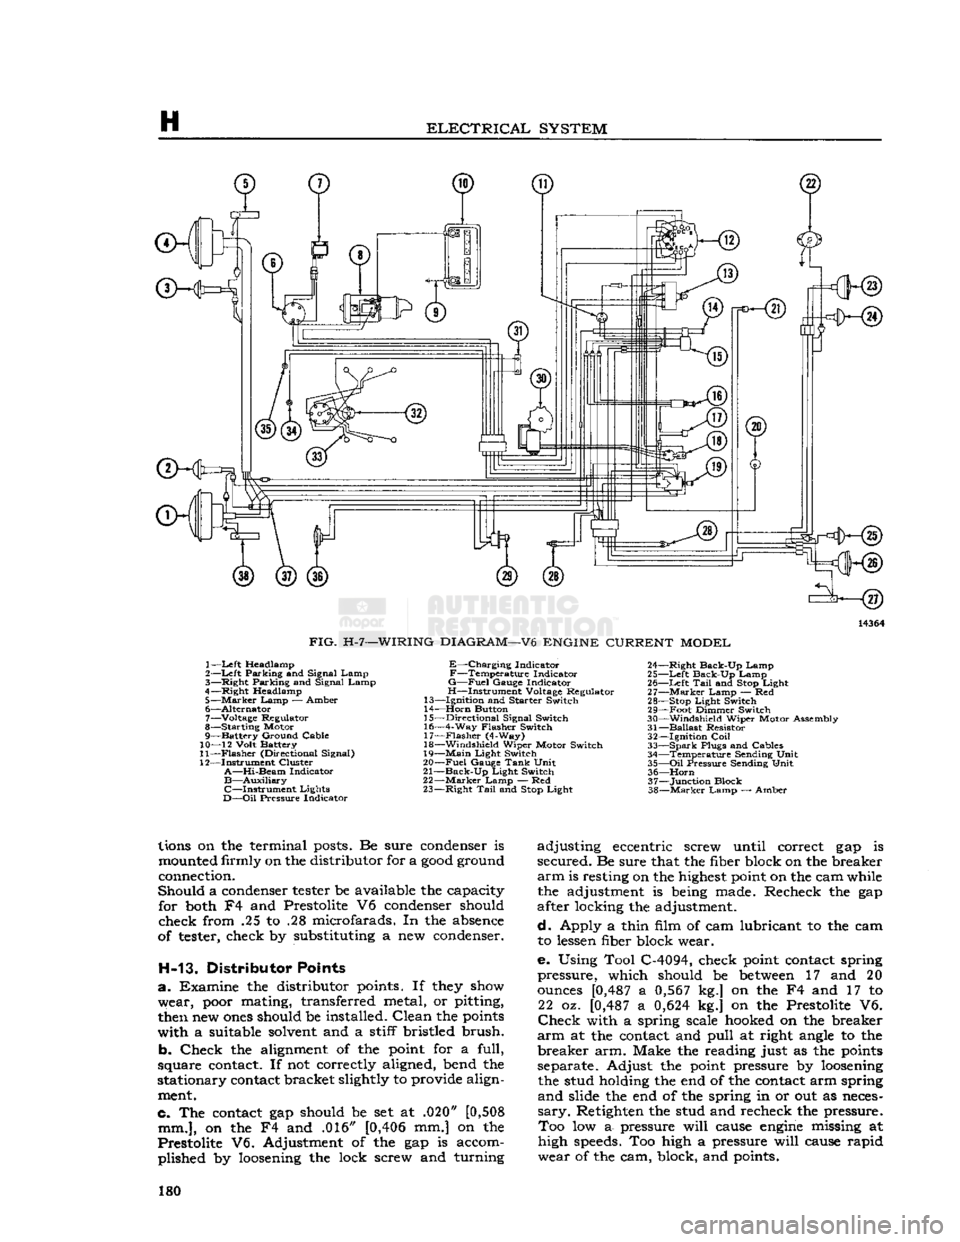 JEEP CJ 1953 Manual PDF 
H 

ELECTRICAL
 SYSTEM 

ffKHs) 

3—<§) 

FIG.
 H-7—WIRING
 DIAGRAM—V6
 ENGINE
 CURRENT
 MODEL 
 1—
 Left
 Headlamp 
2—Left Parking and Signal Lamp 
3— Right Parking and Signal Lamp 
4�